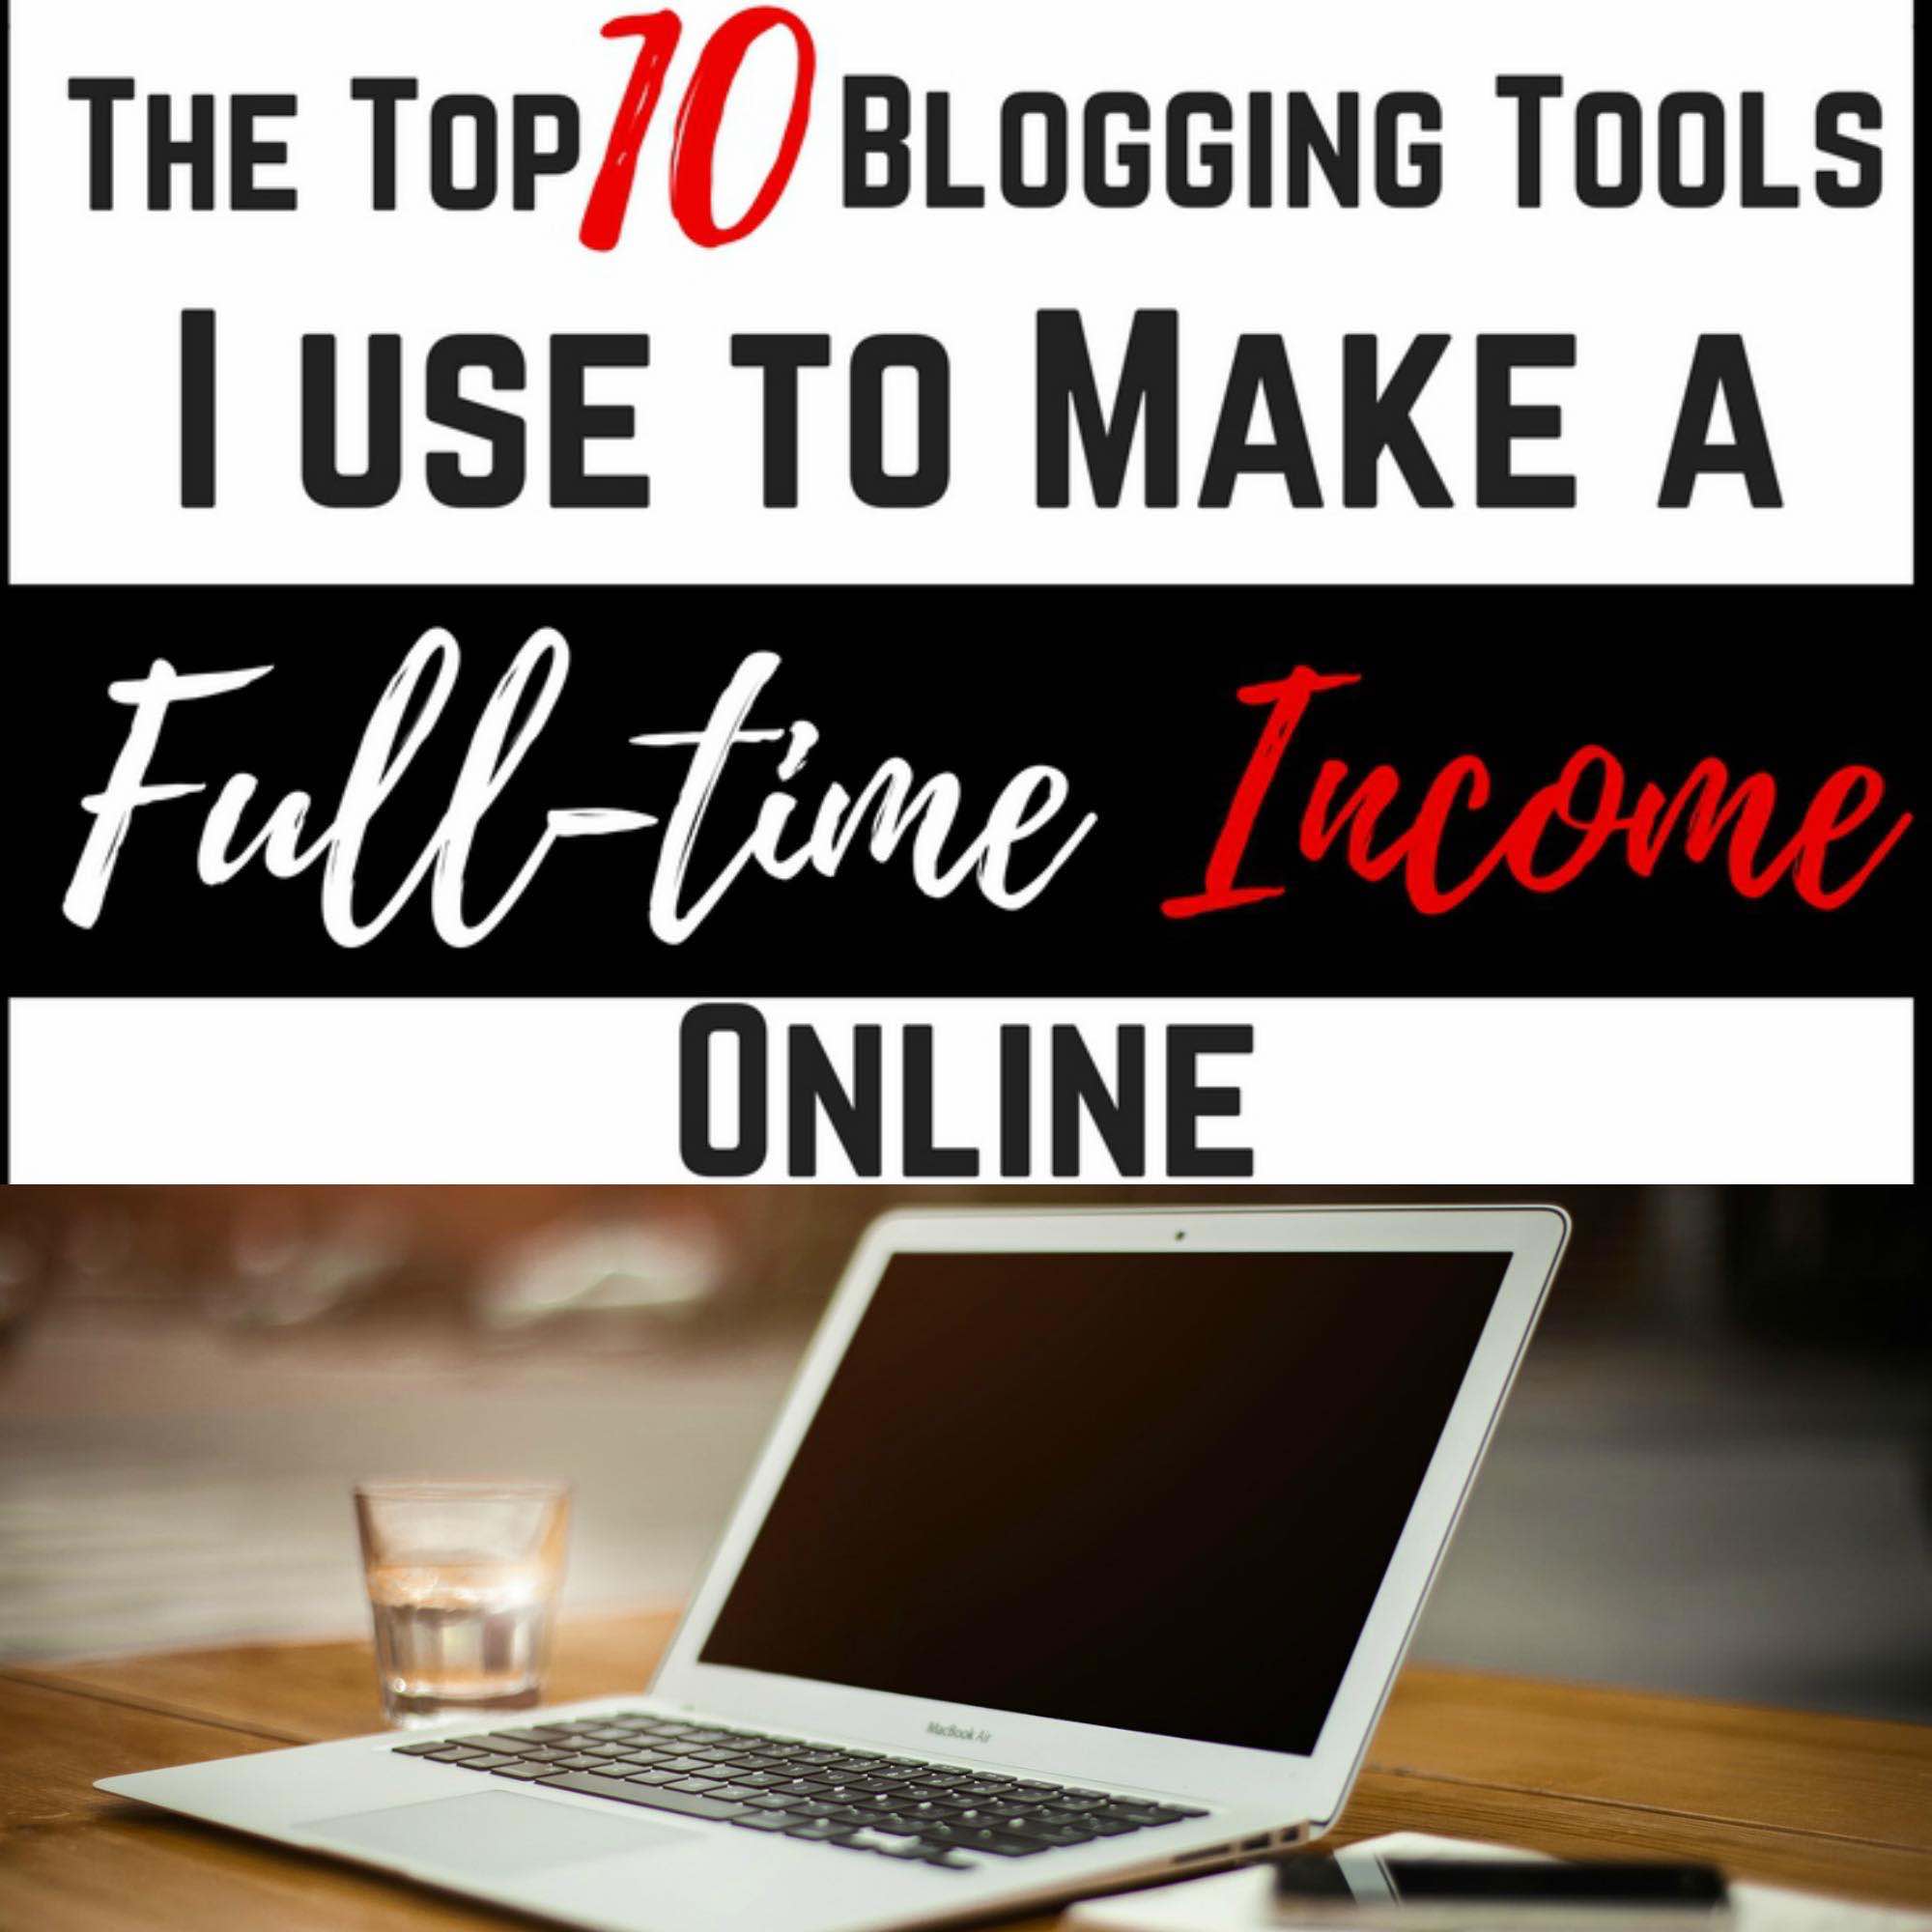 The Top 10 Blogging Tools I Use To Make a Full Time Income Online